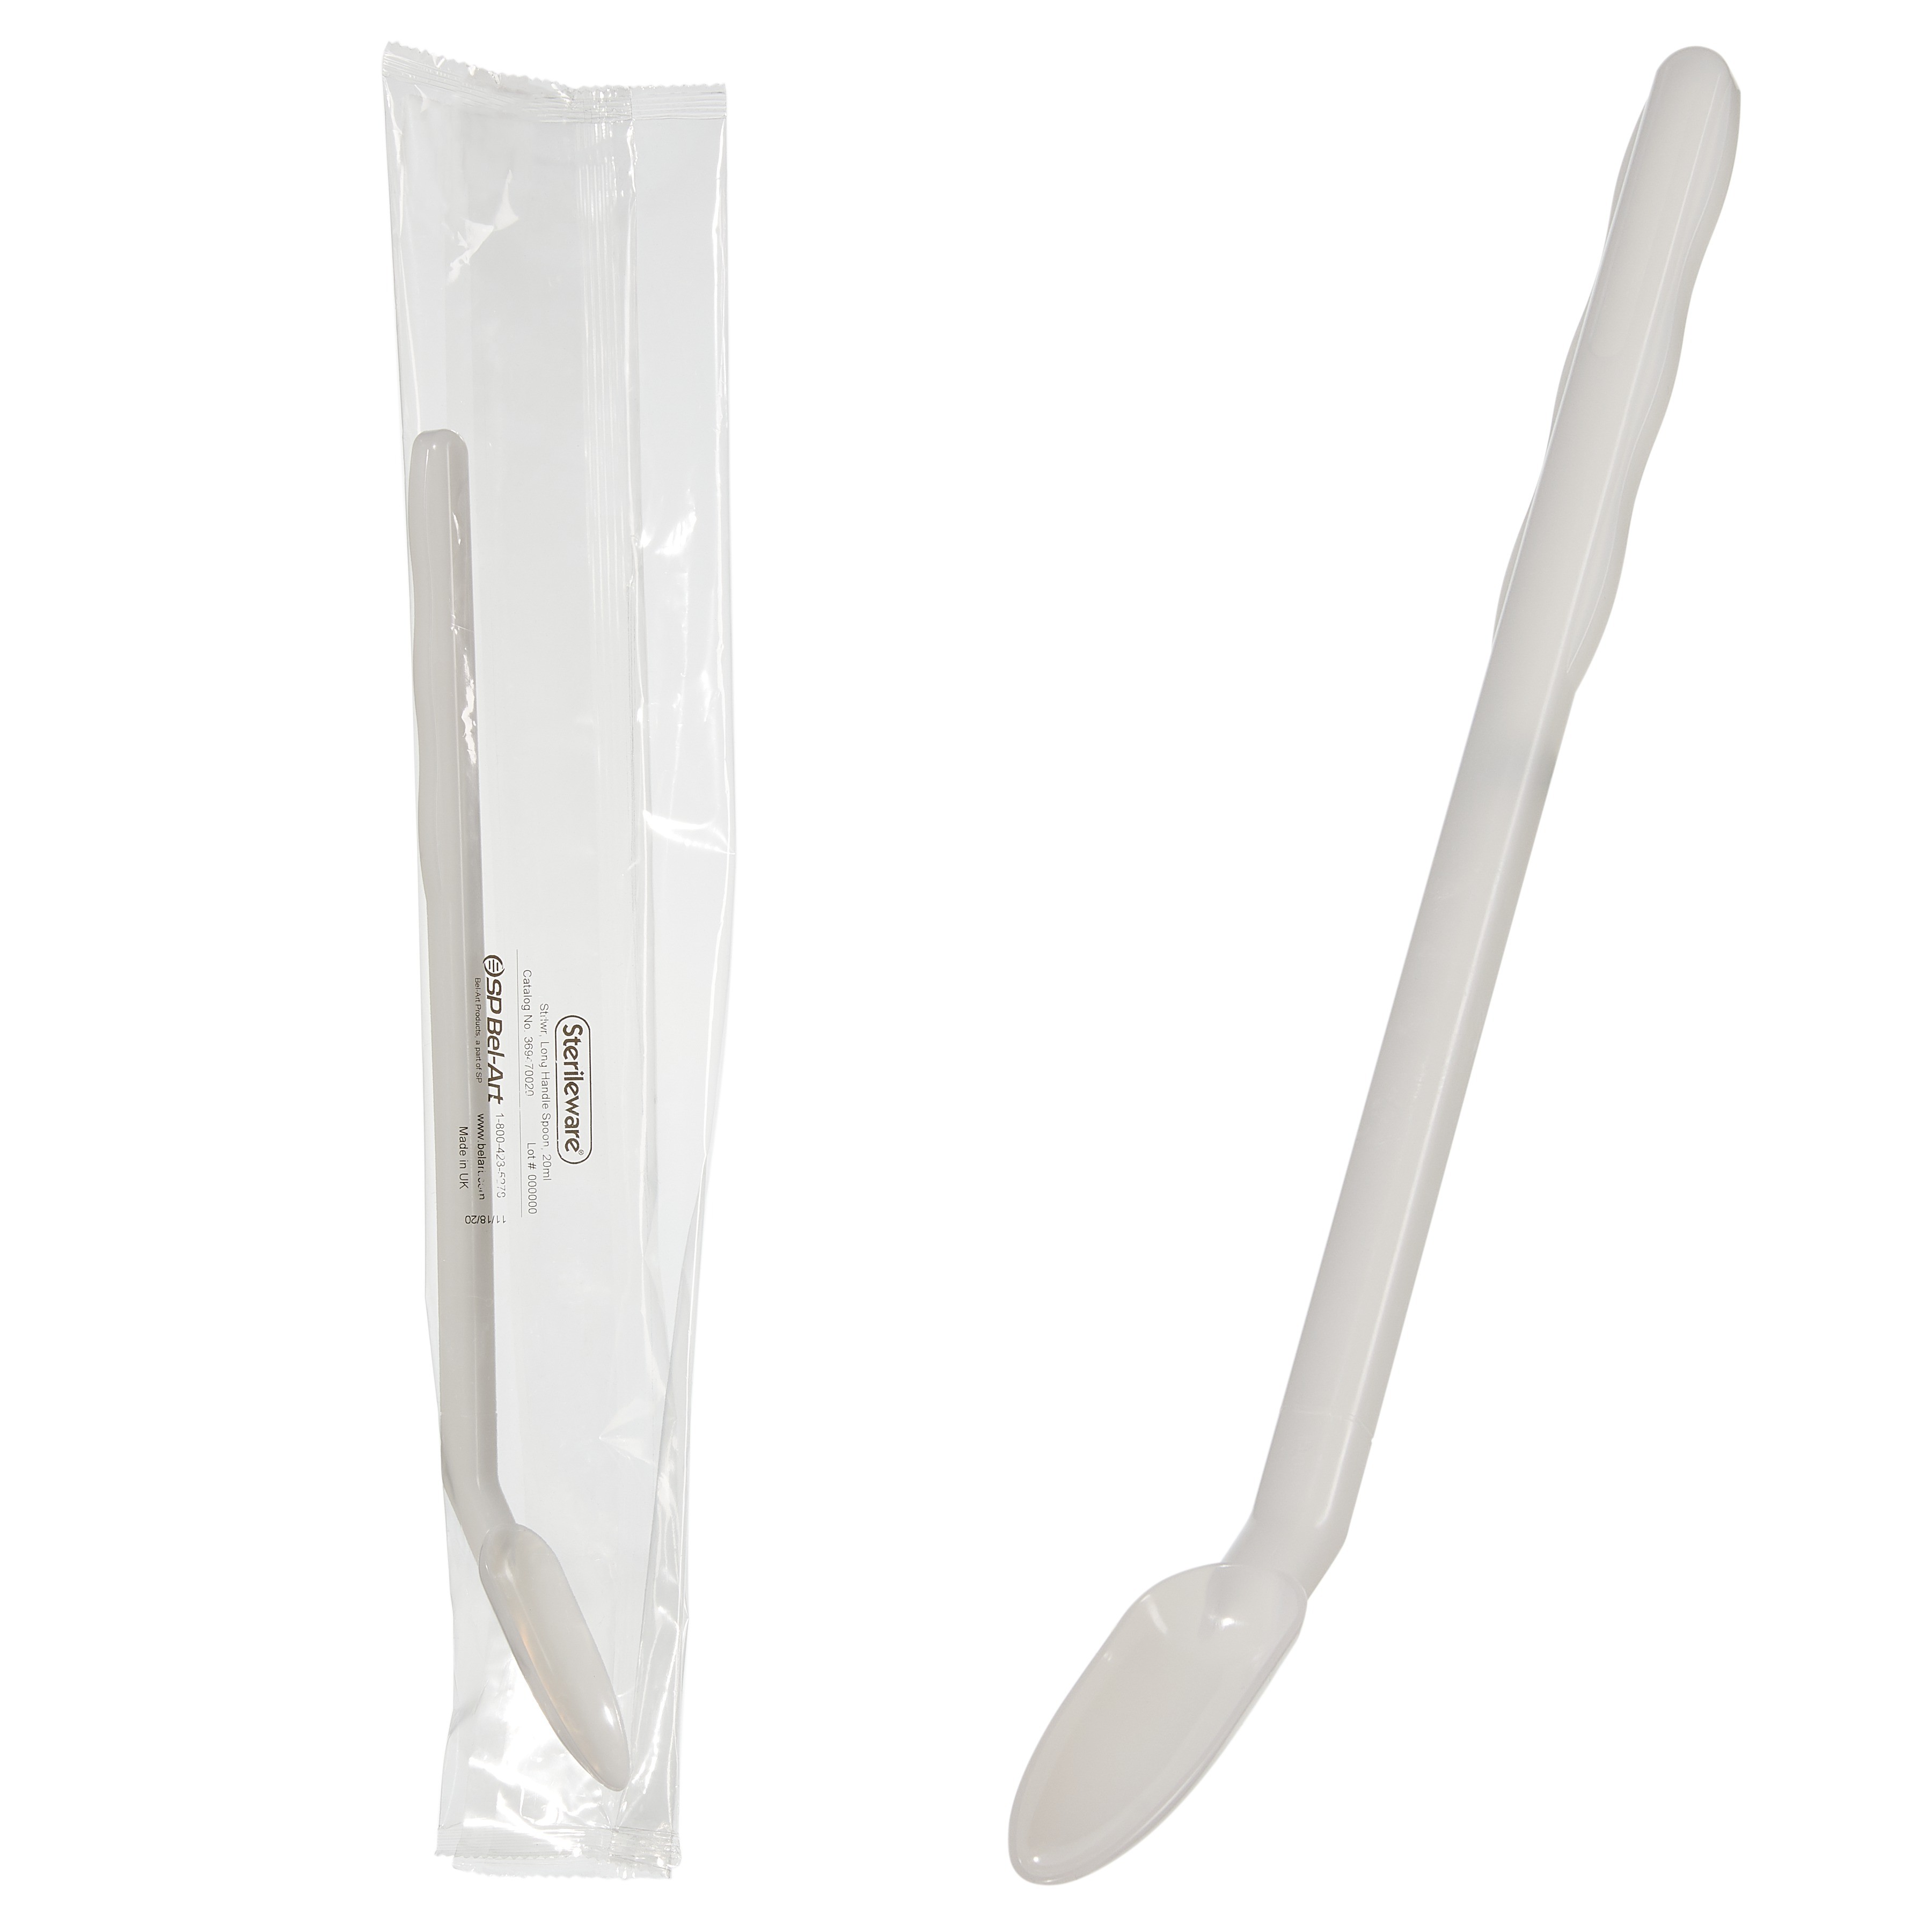 Sterileware Extra-Long, Bent Handle Spoons; 20ml, Individually Wrapped (Pack of 100)